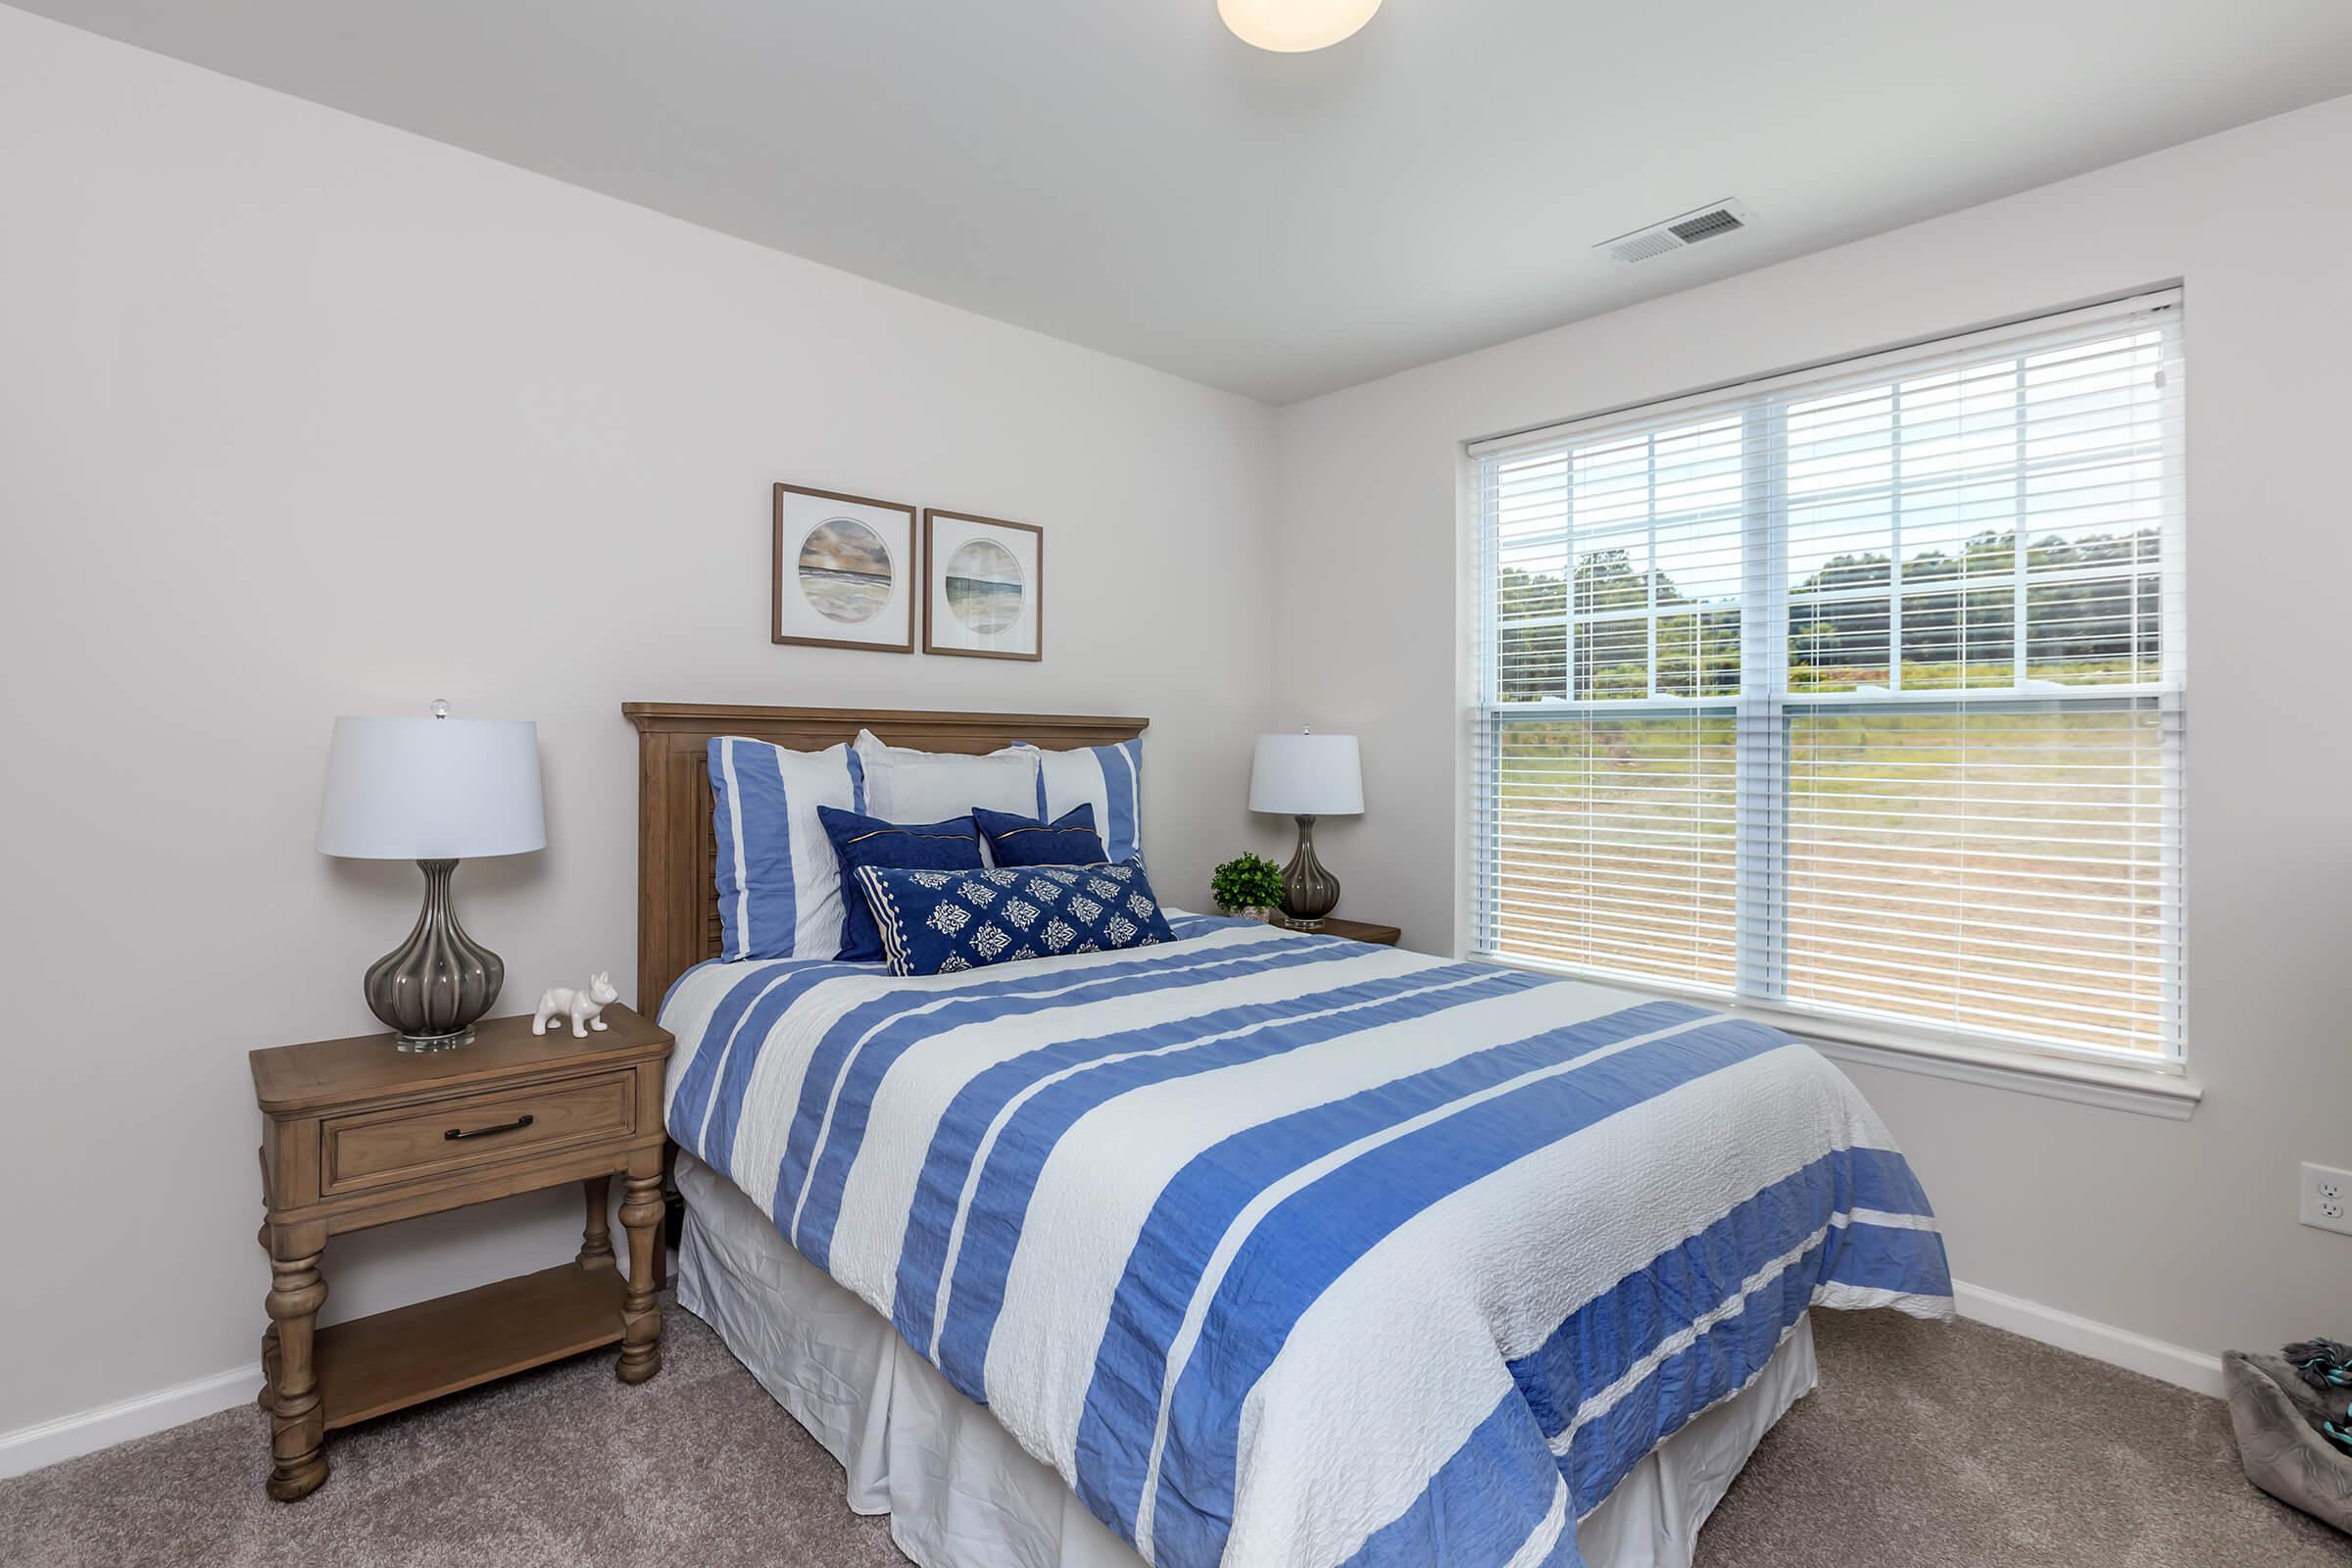 Wake Up To Natural Lighting In Riverstone Apartments At Long Shoals In Arden, NC